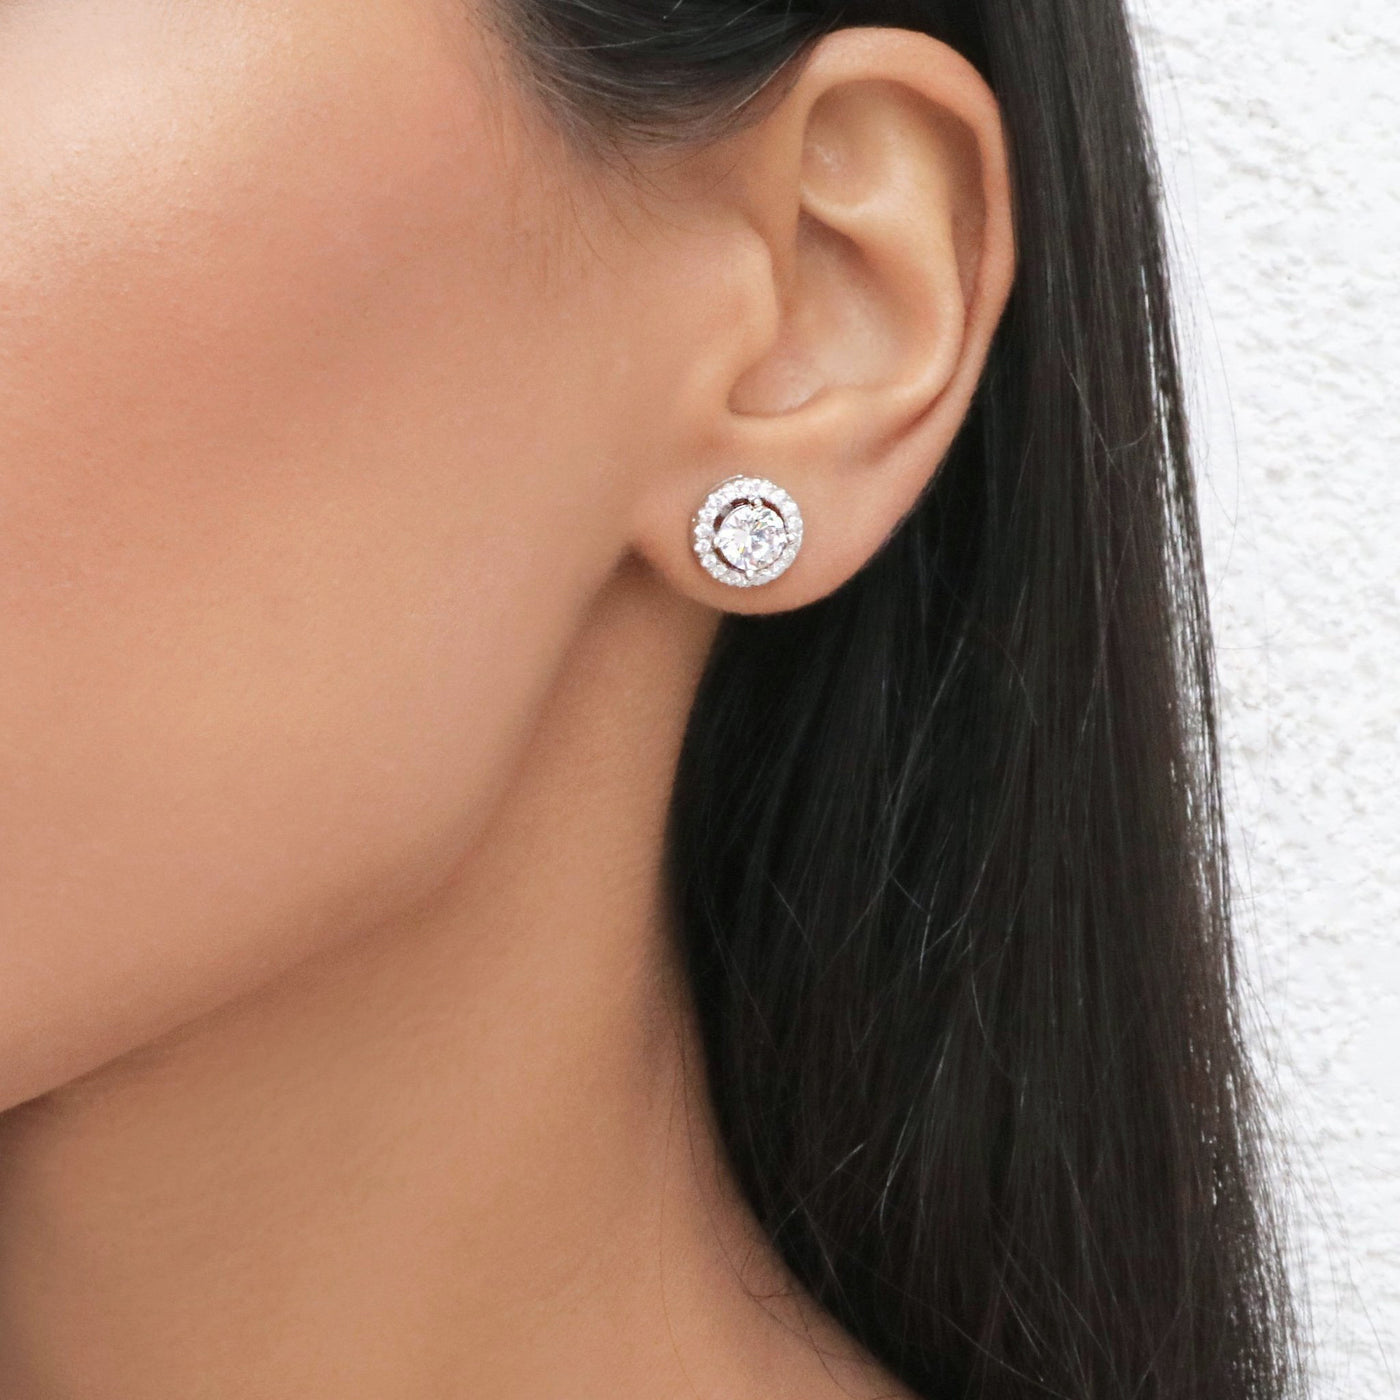 Close up of woman wearing a silver cubic zirconia 10mm stud circle round earring.